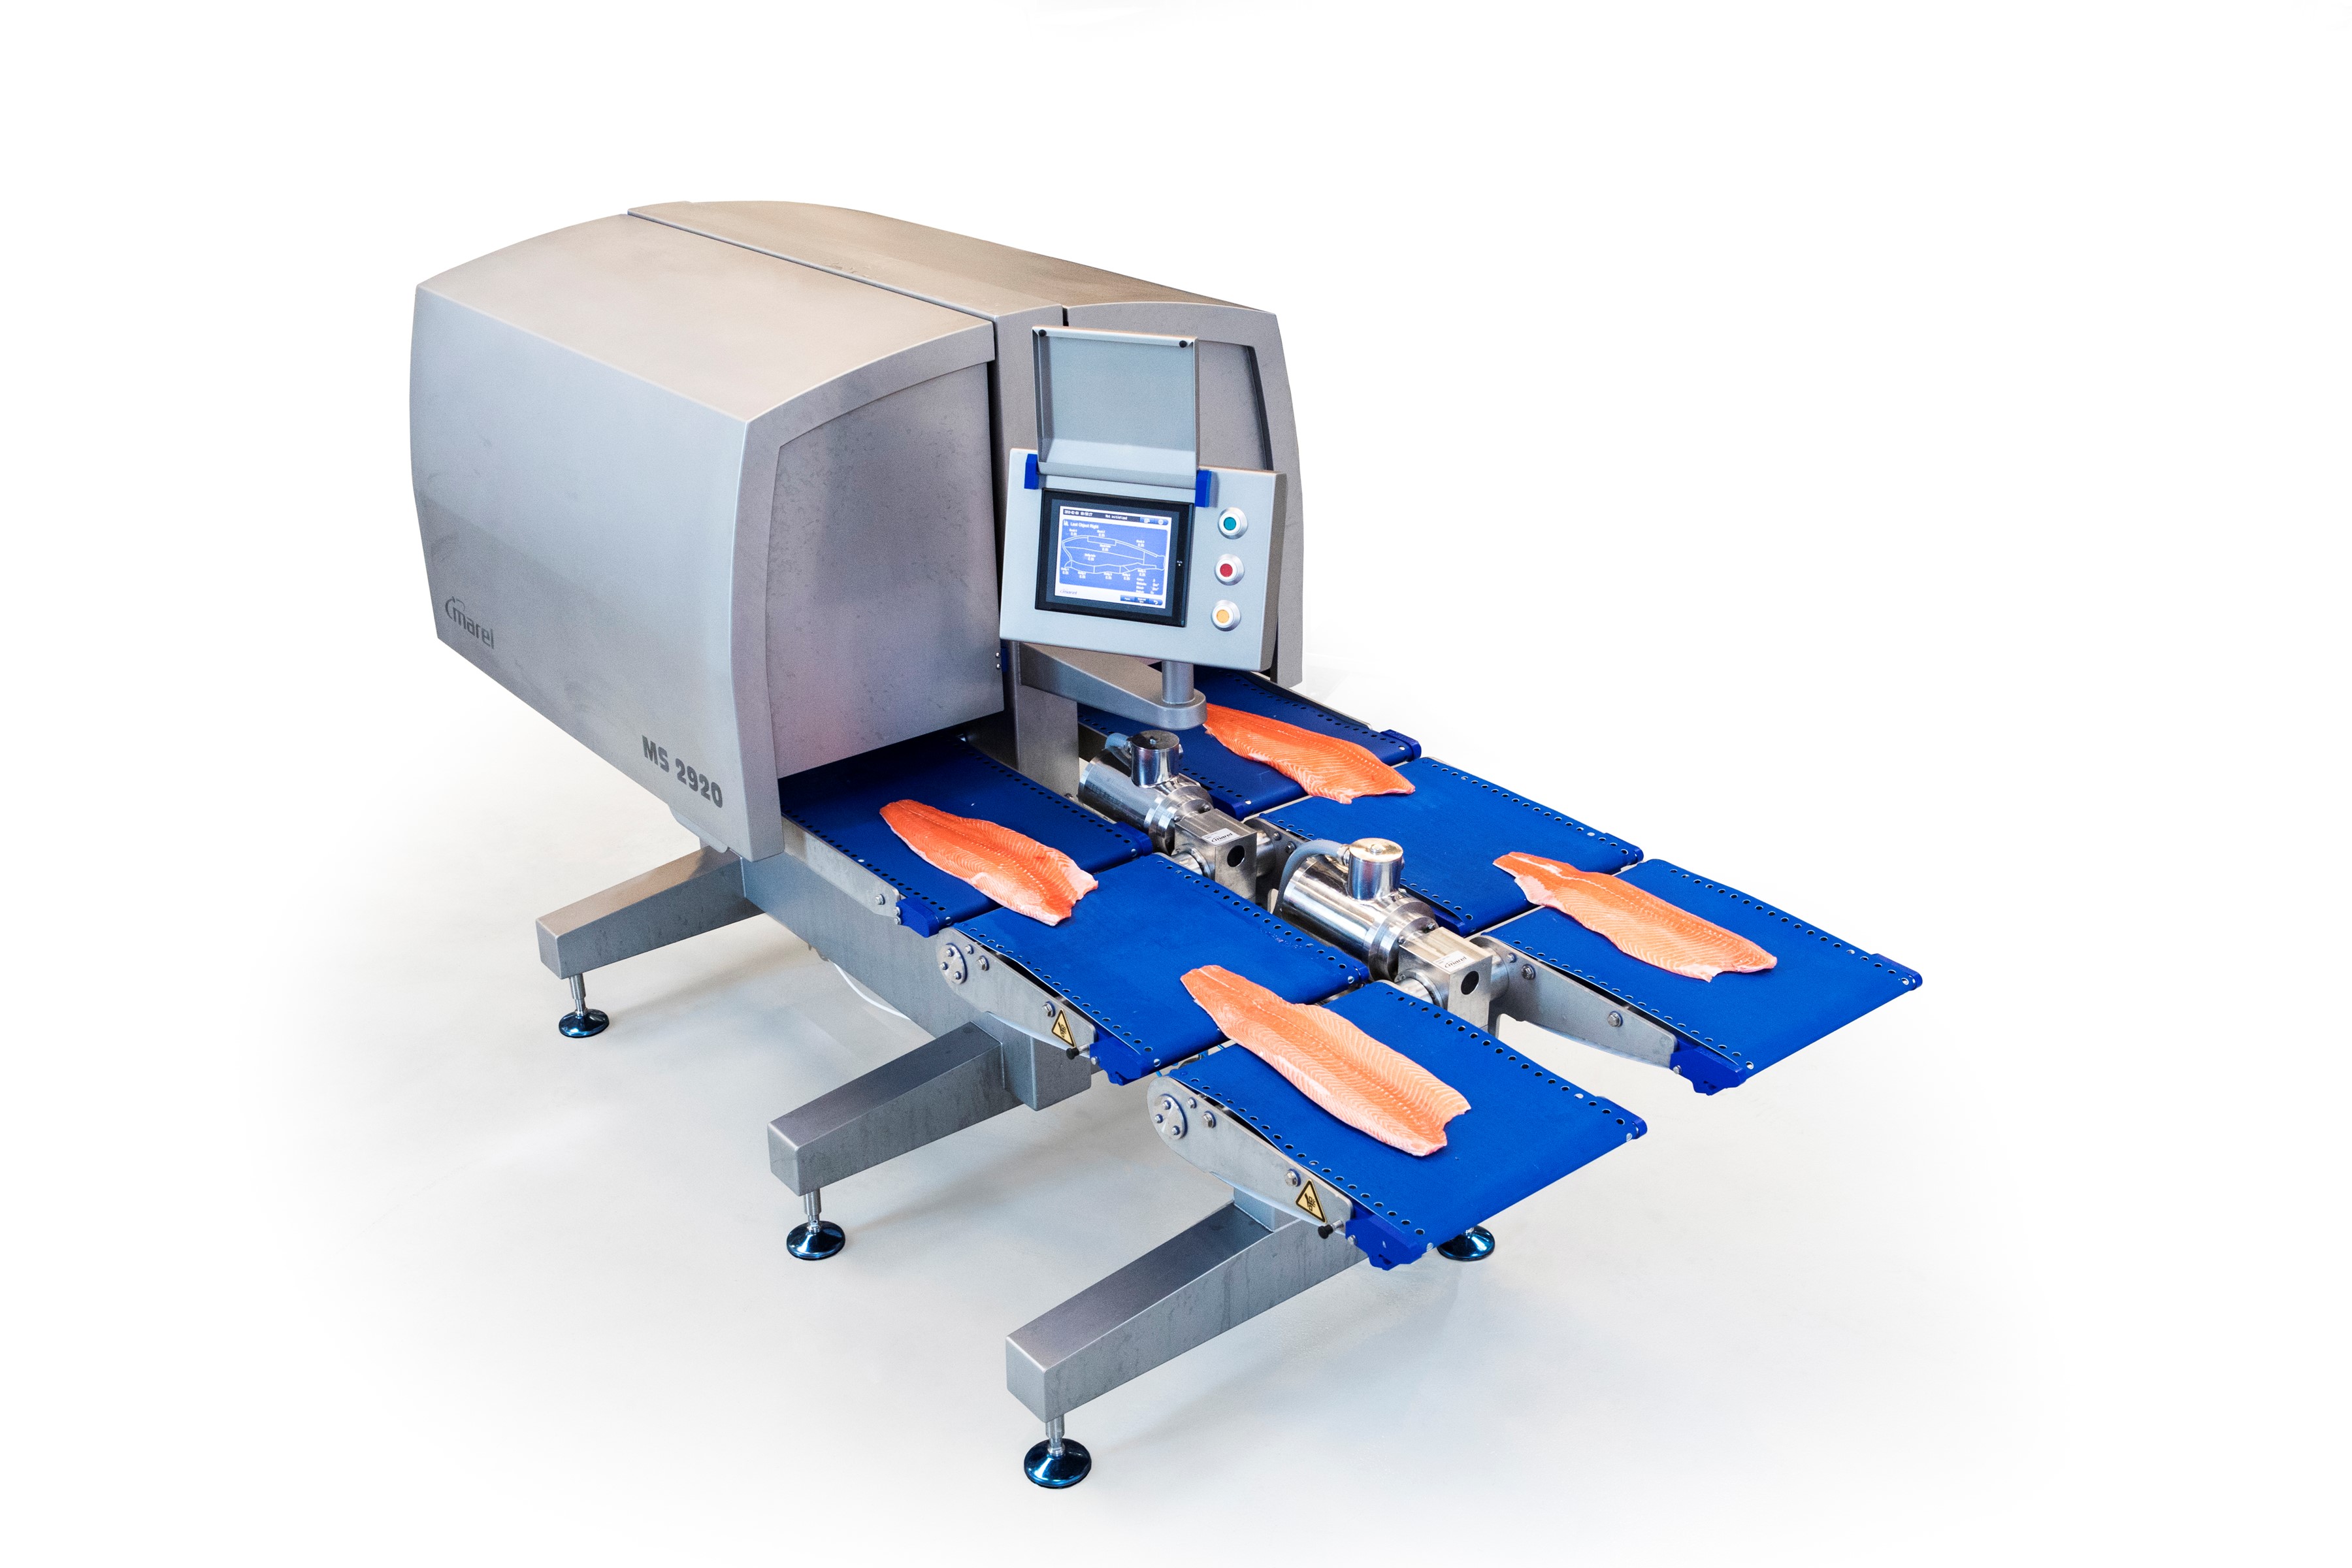  Quality scanning of salmon fillets